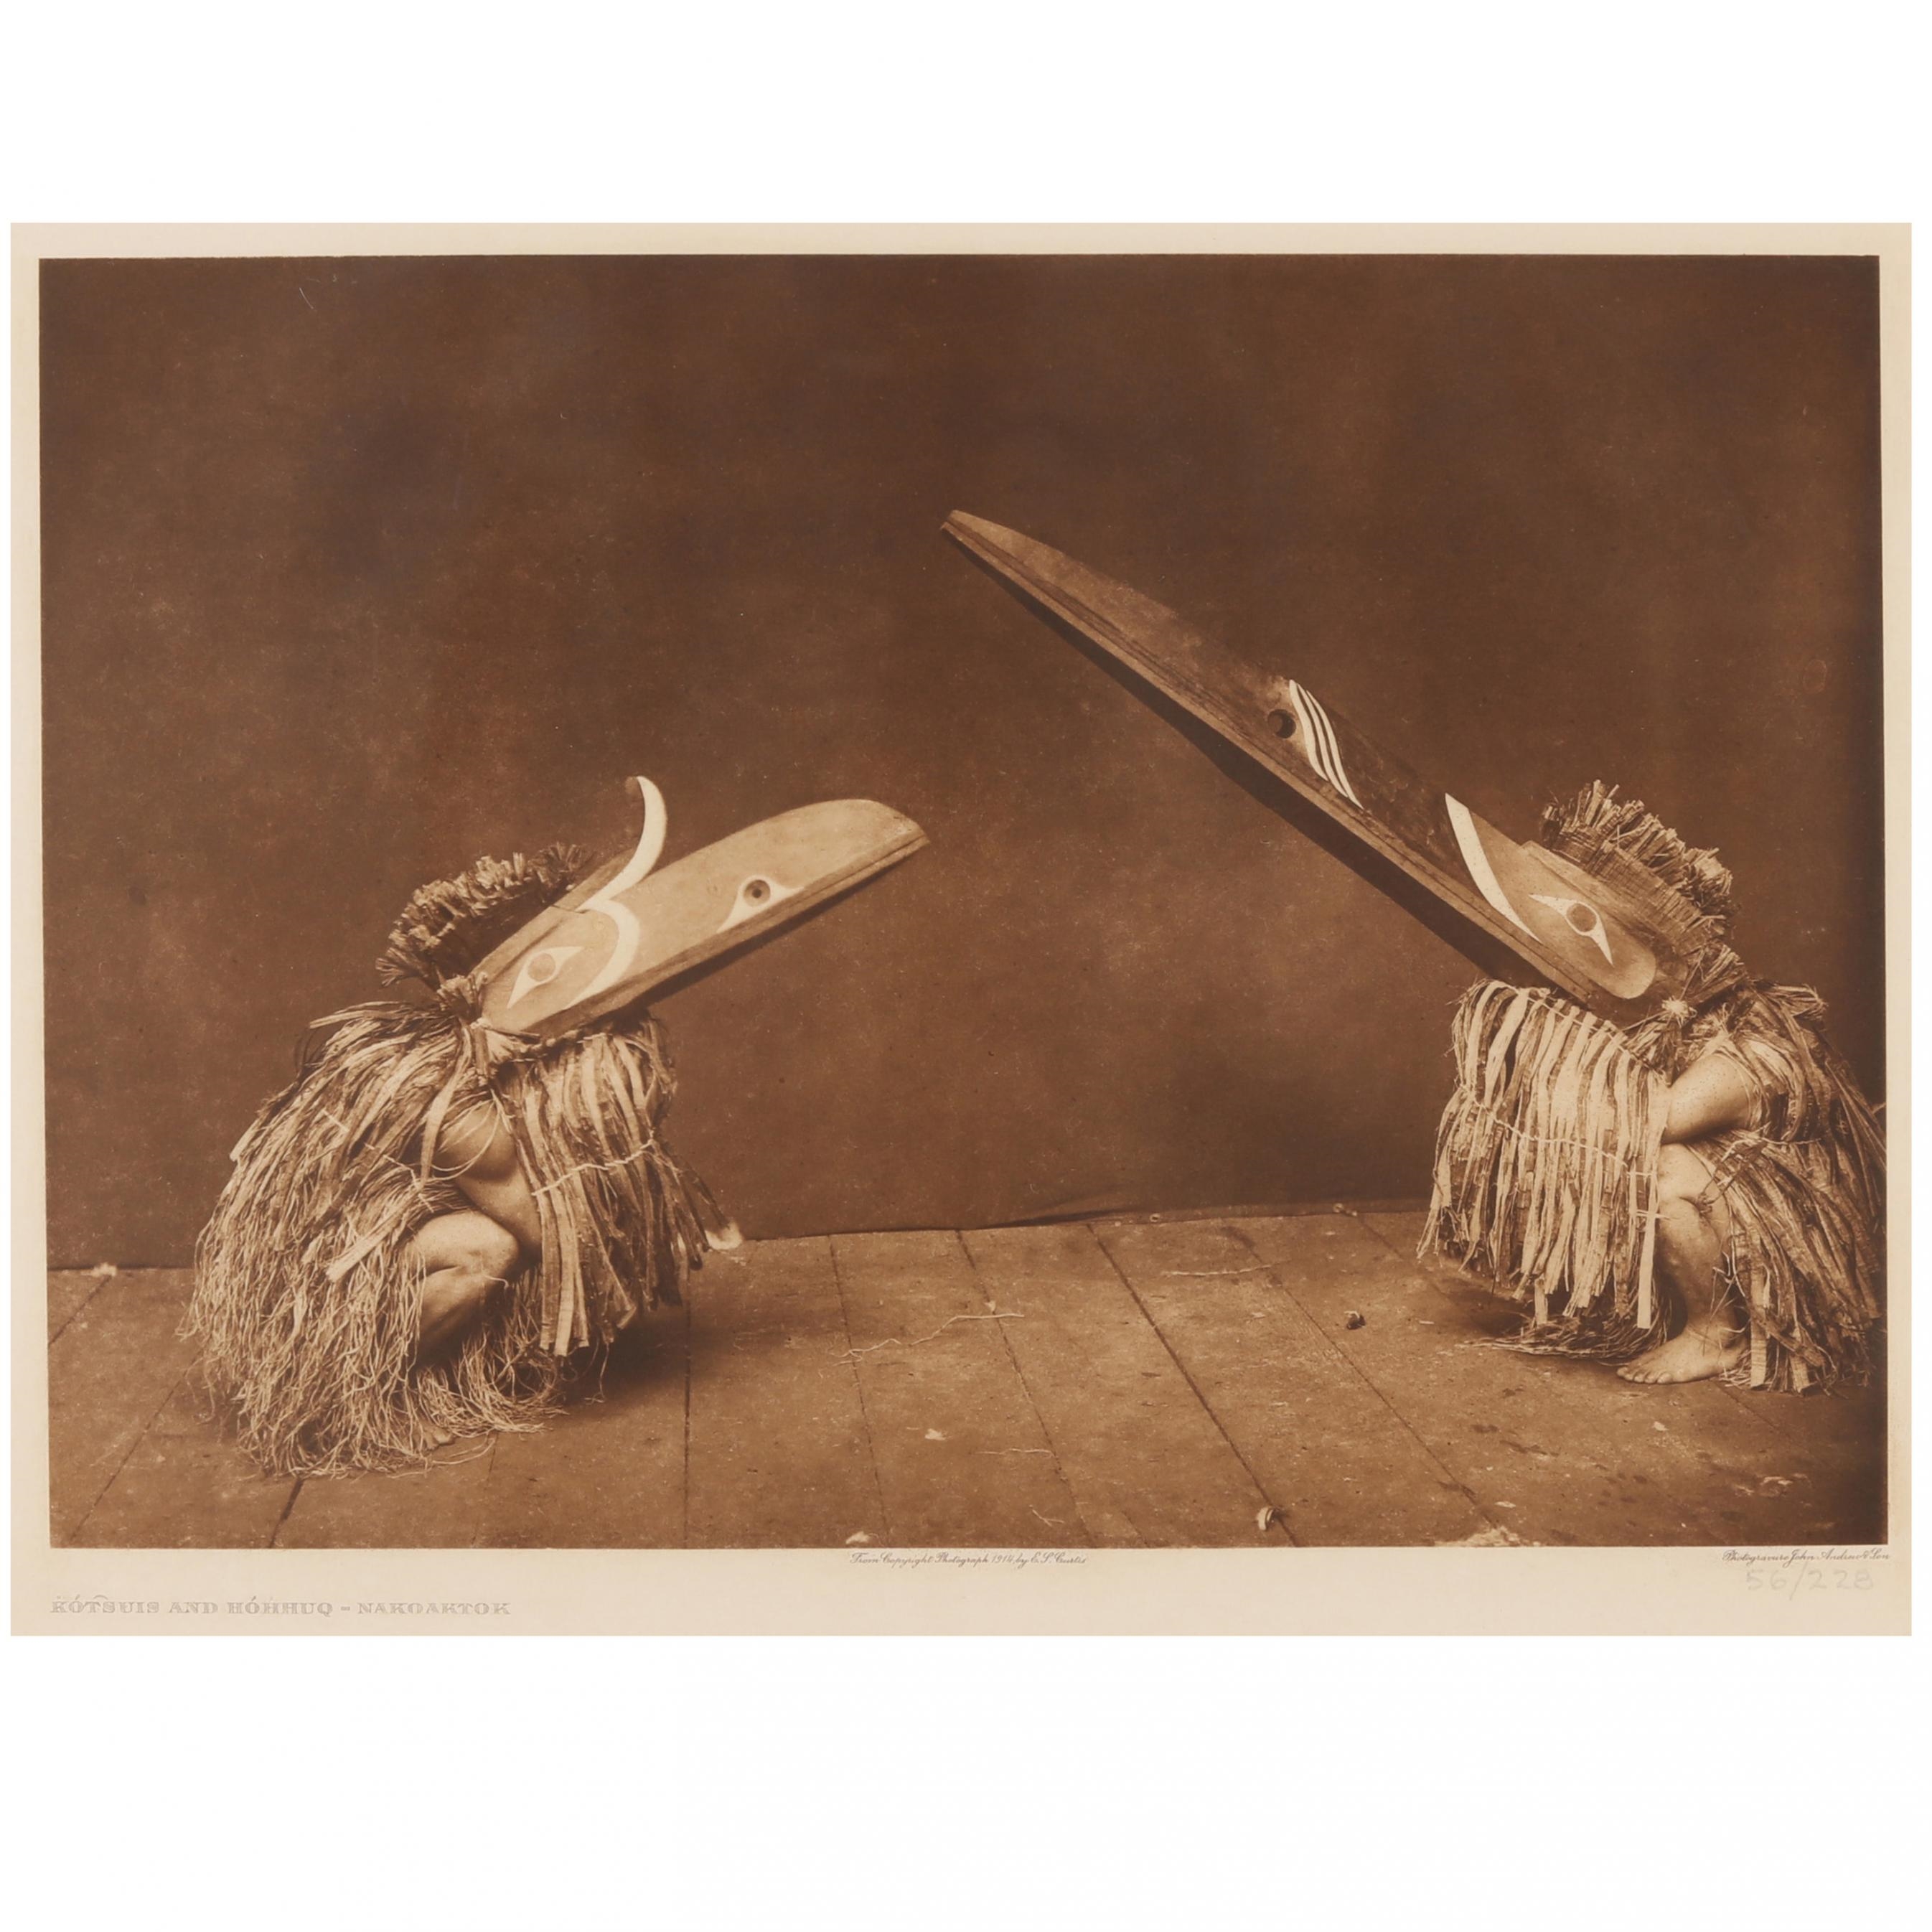 Artwork by Edward S. Curtis, Kotsuis and Hohhuq - Nakoaktok and Hamatsa Emerging from the Woods - Koskimo (Two Works), Made of photogravure